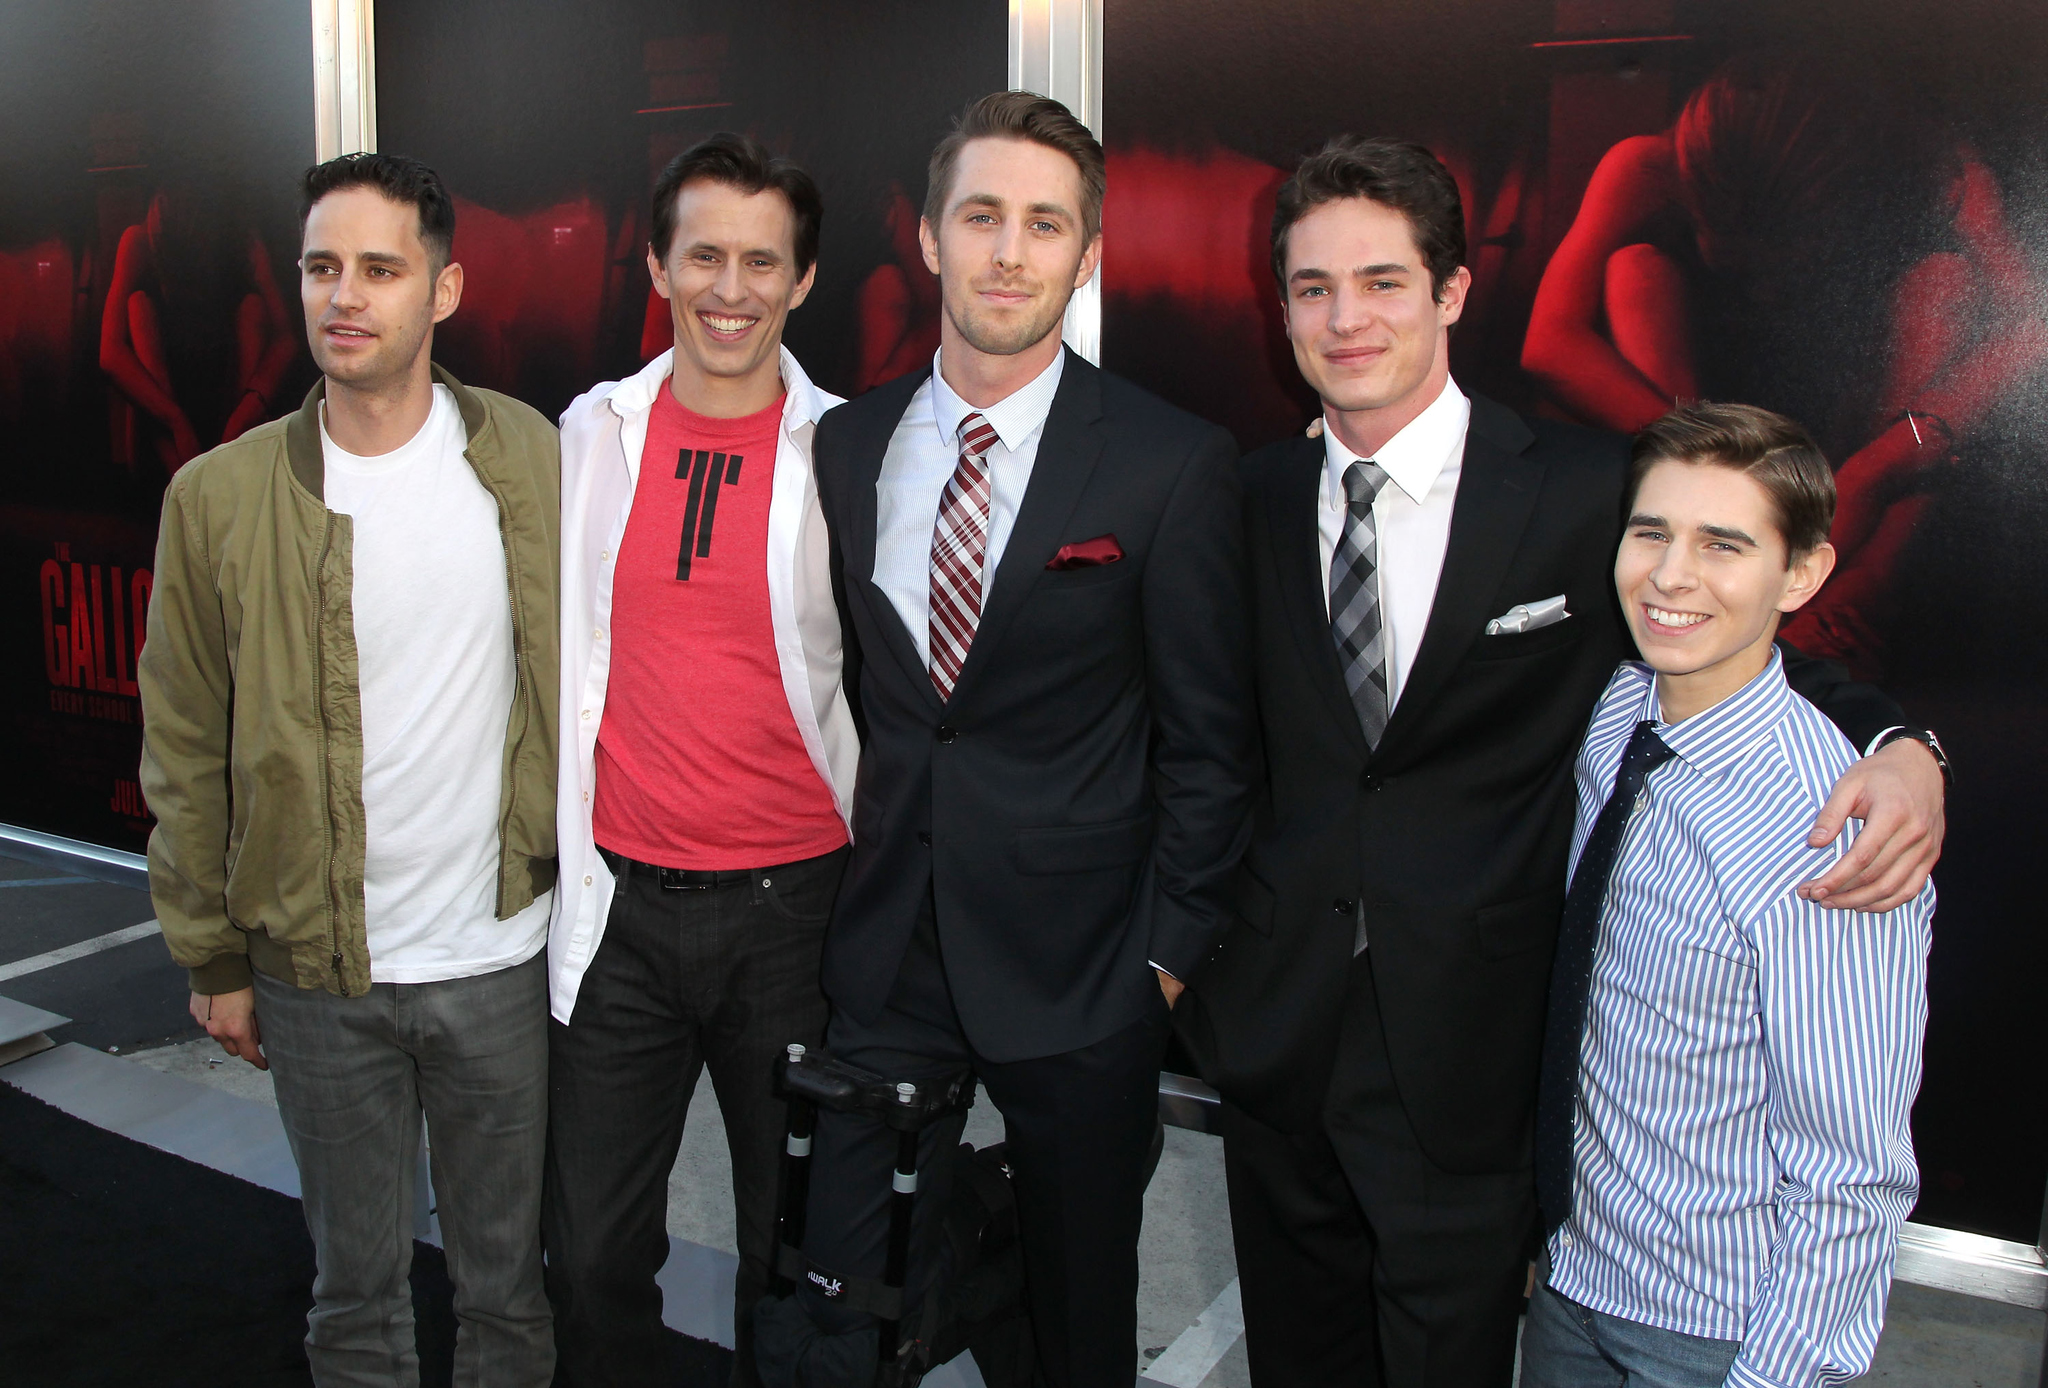 Dean Schnider, Reese Mishler, Chris Lofing, Travis Cluff and Ryan Shoos at event of The Gallows (2015)